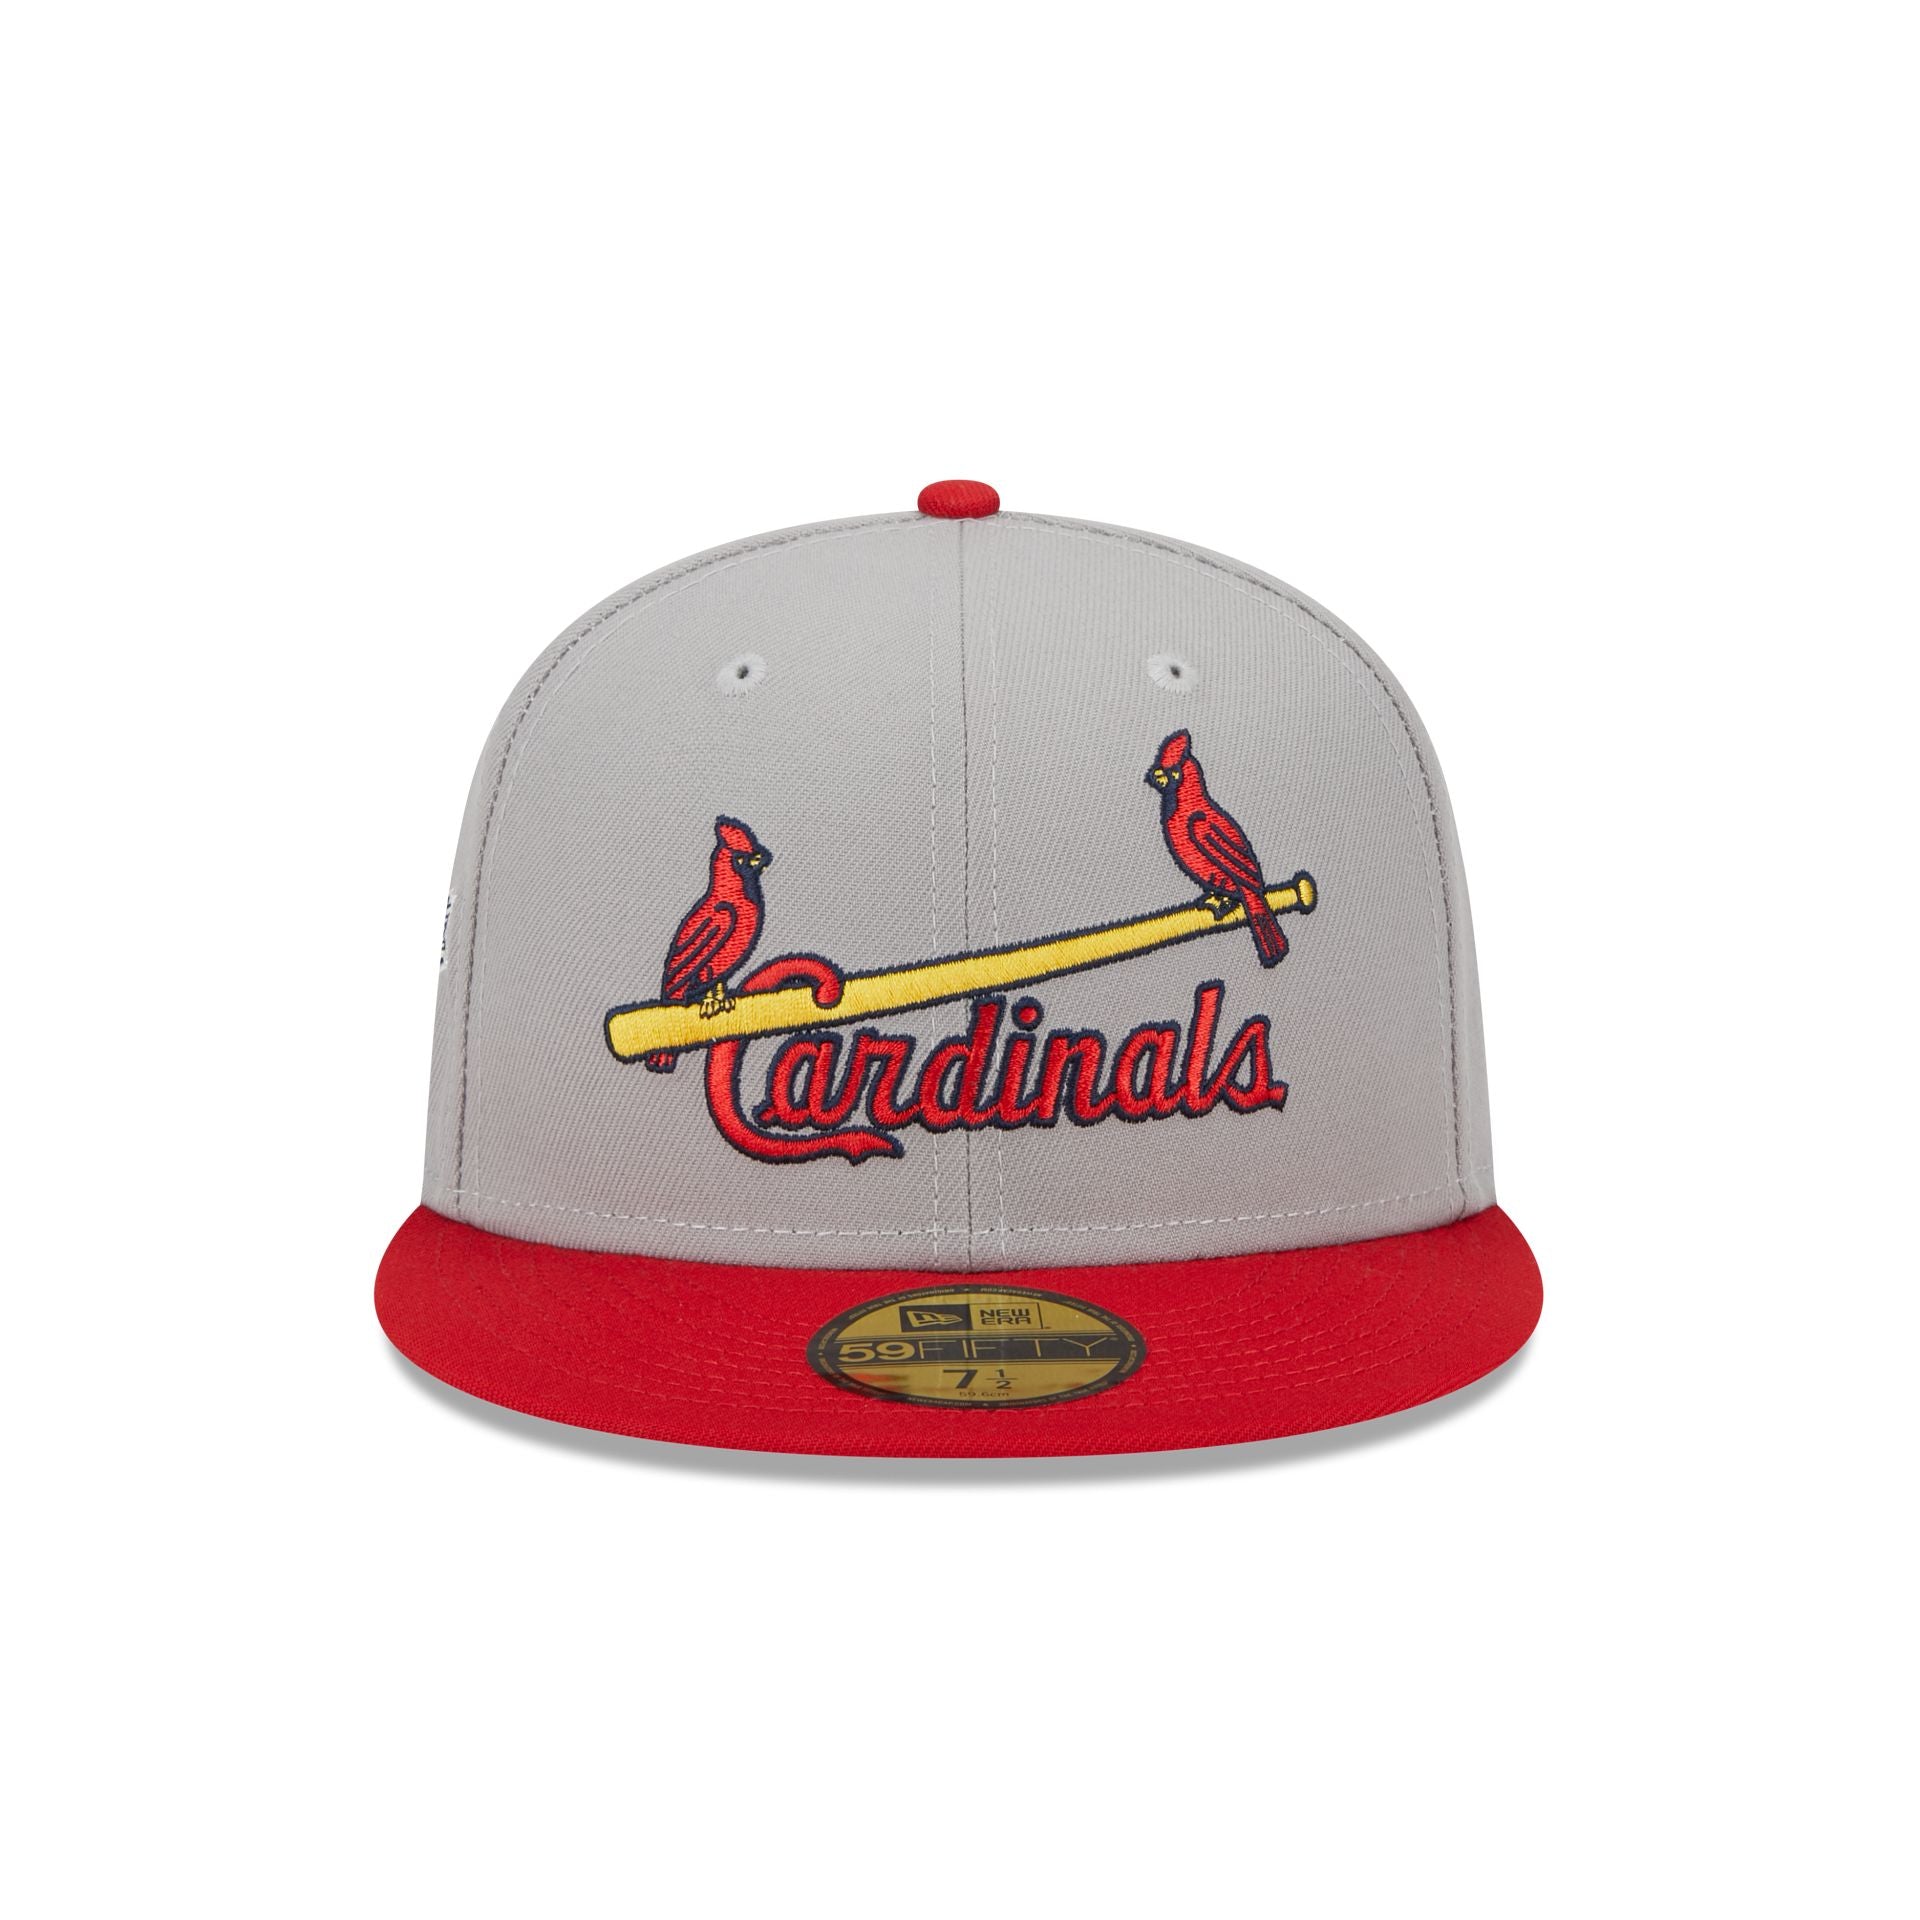 St. Louis Cardinals Black Red 59Fifty Fitted Hat by MLB x New Era